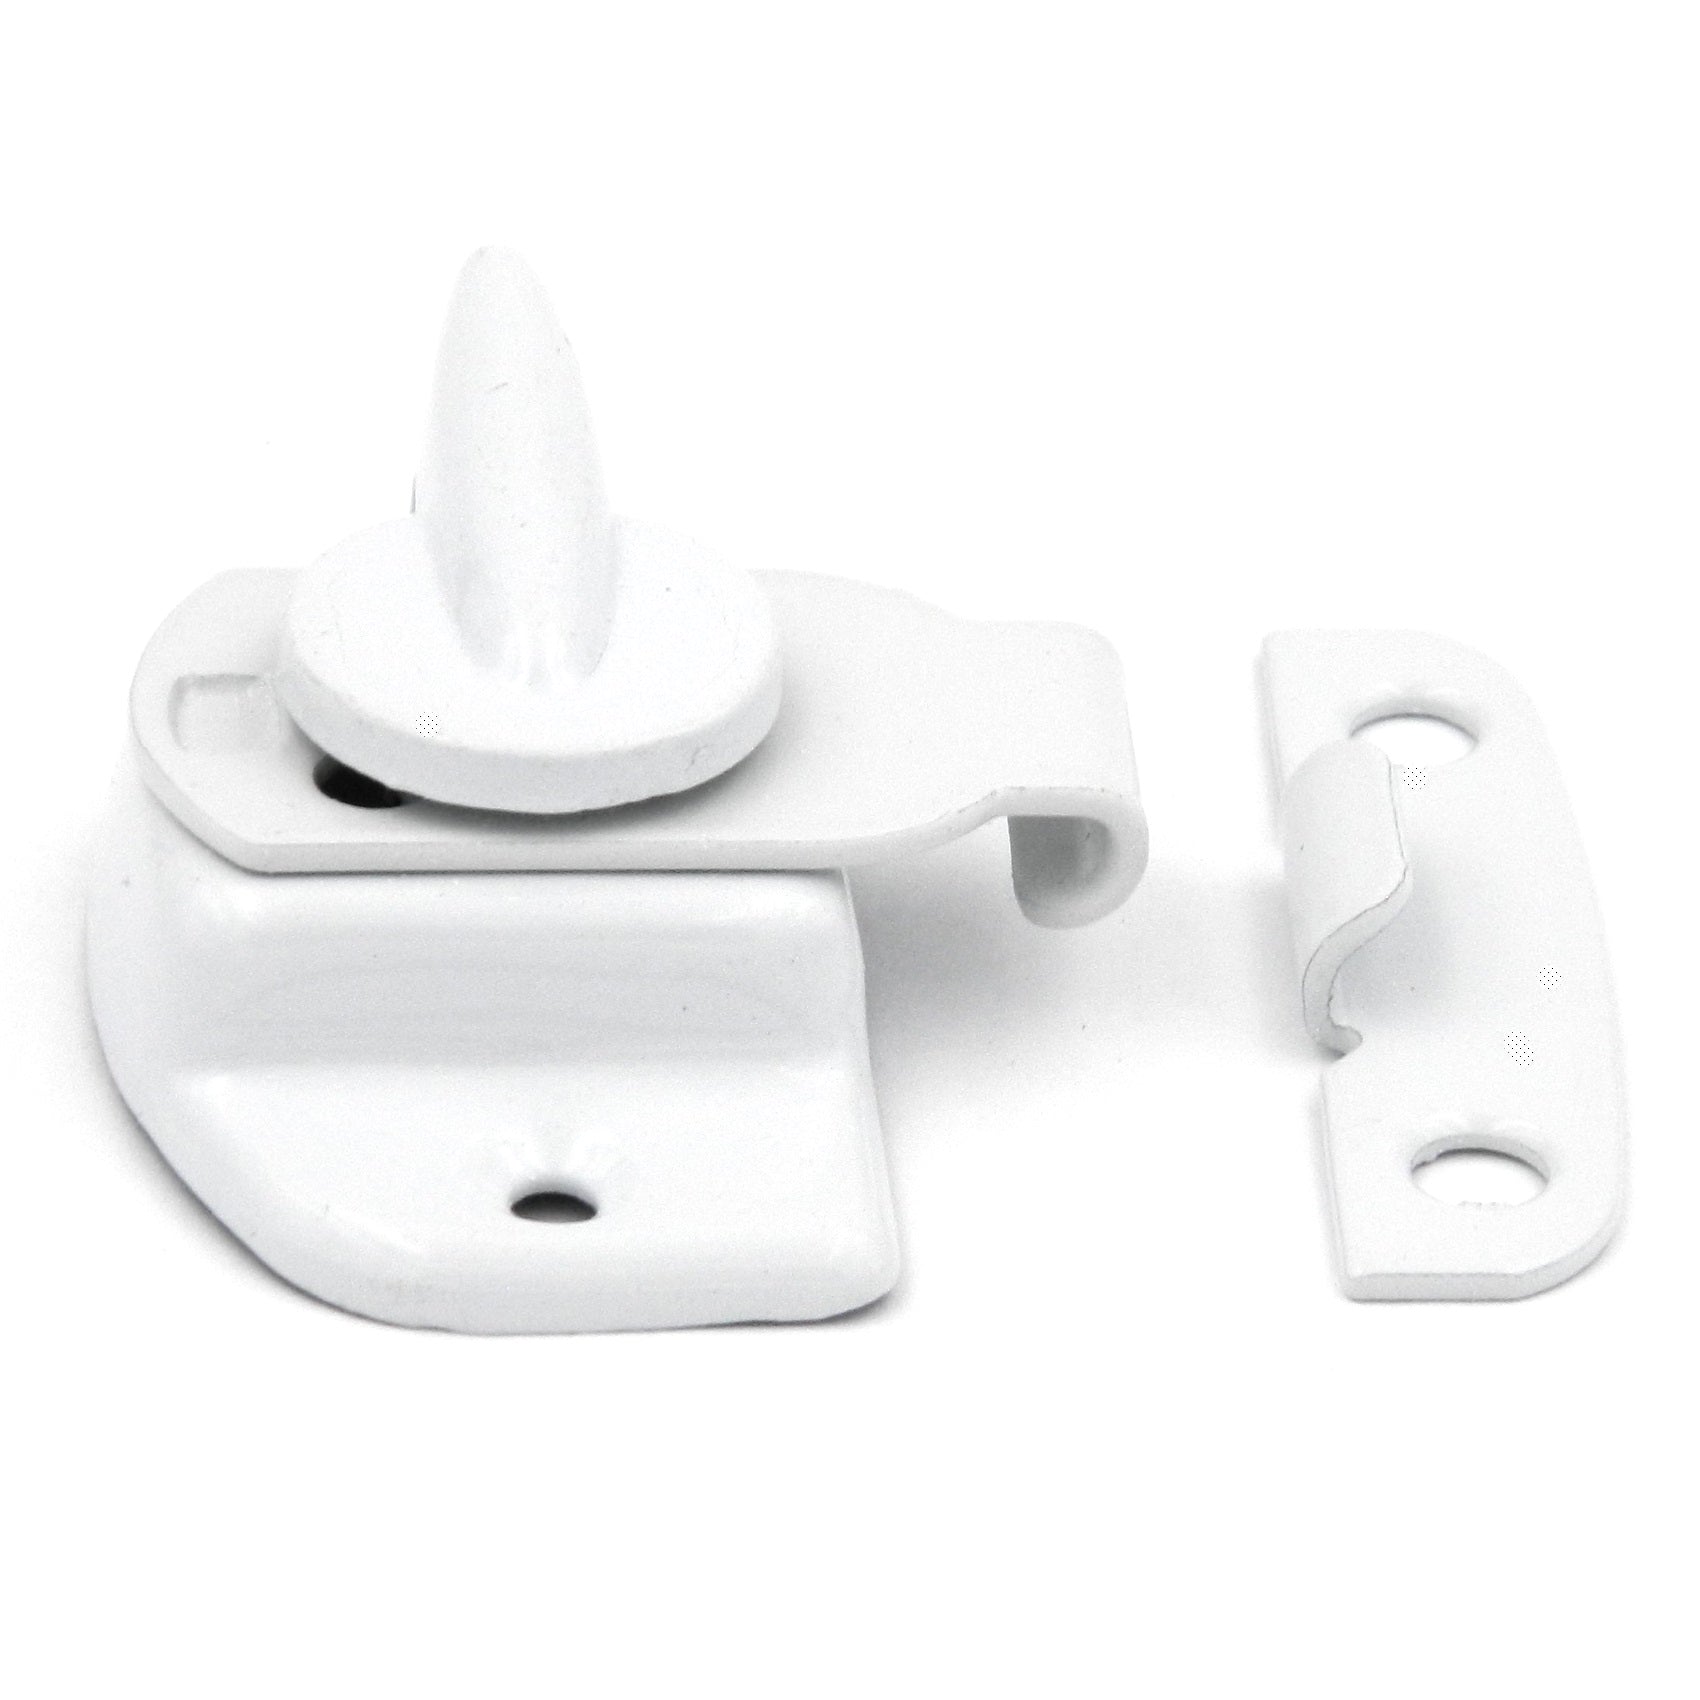 P1443 White 2 1/4" Clamp-Tight Window Sash Lock Belwith Hardware Products